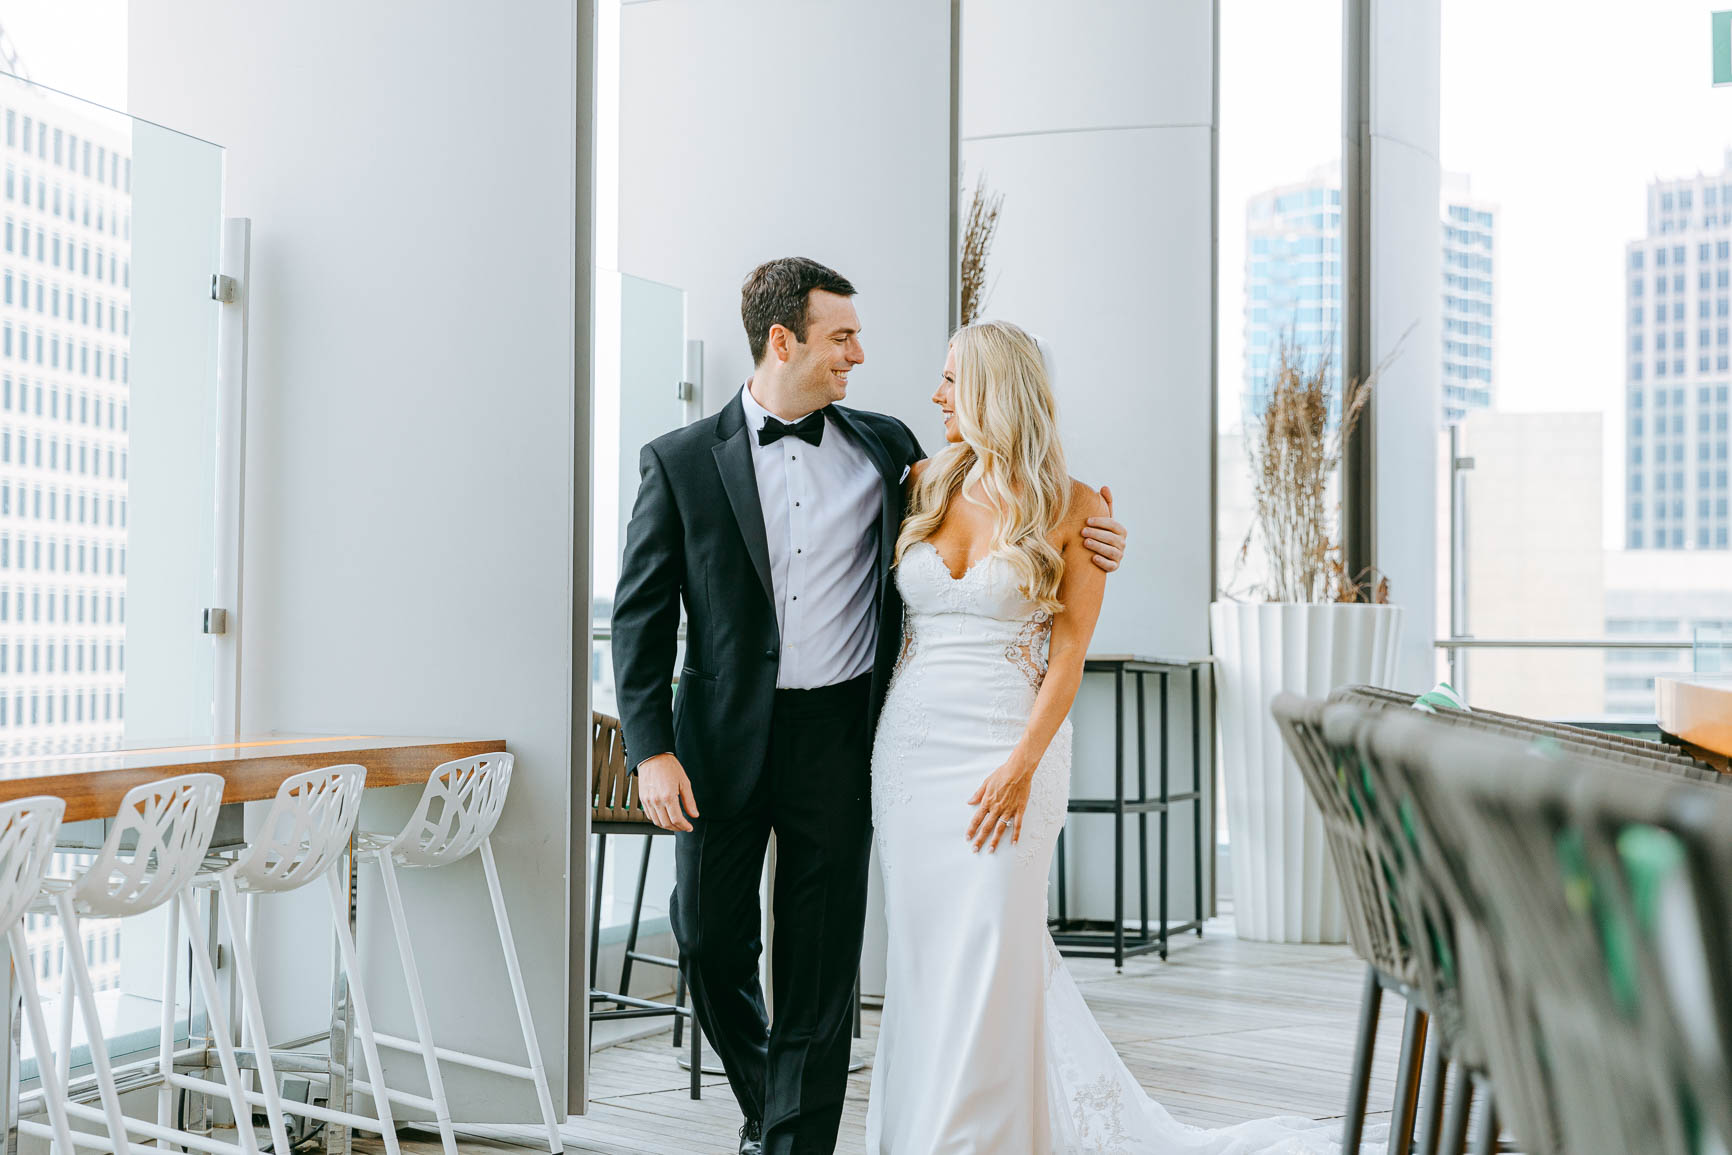 Bride and groom couple's session at merchant & trade rooftop shot by Nhieu Tang Photography | nhieutang.com